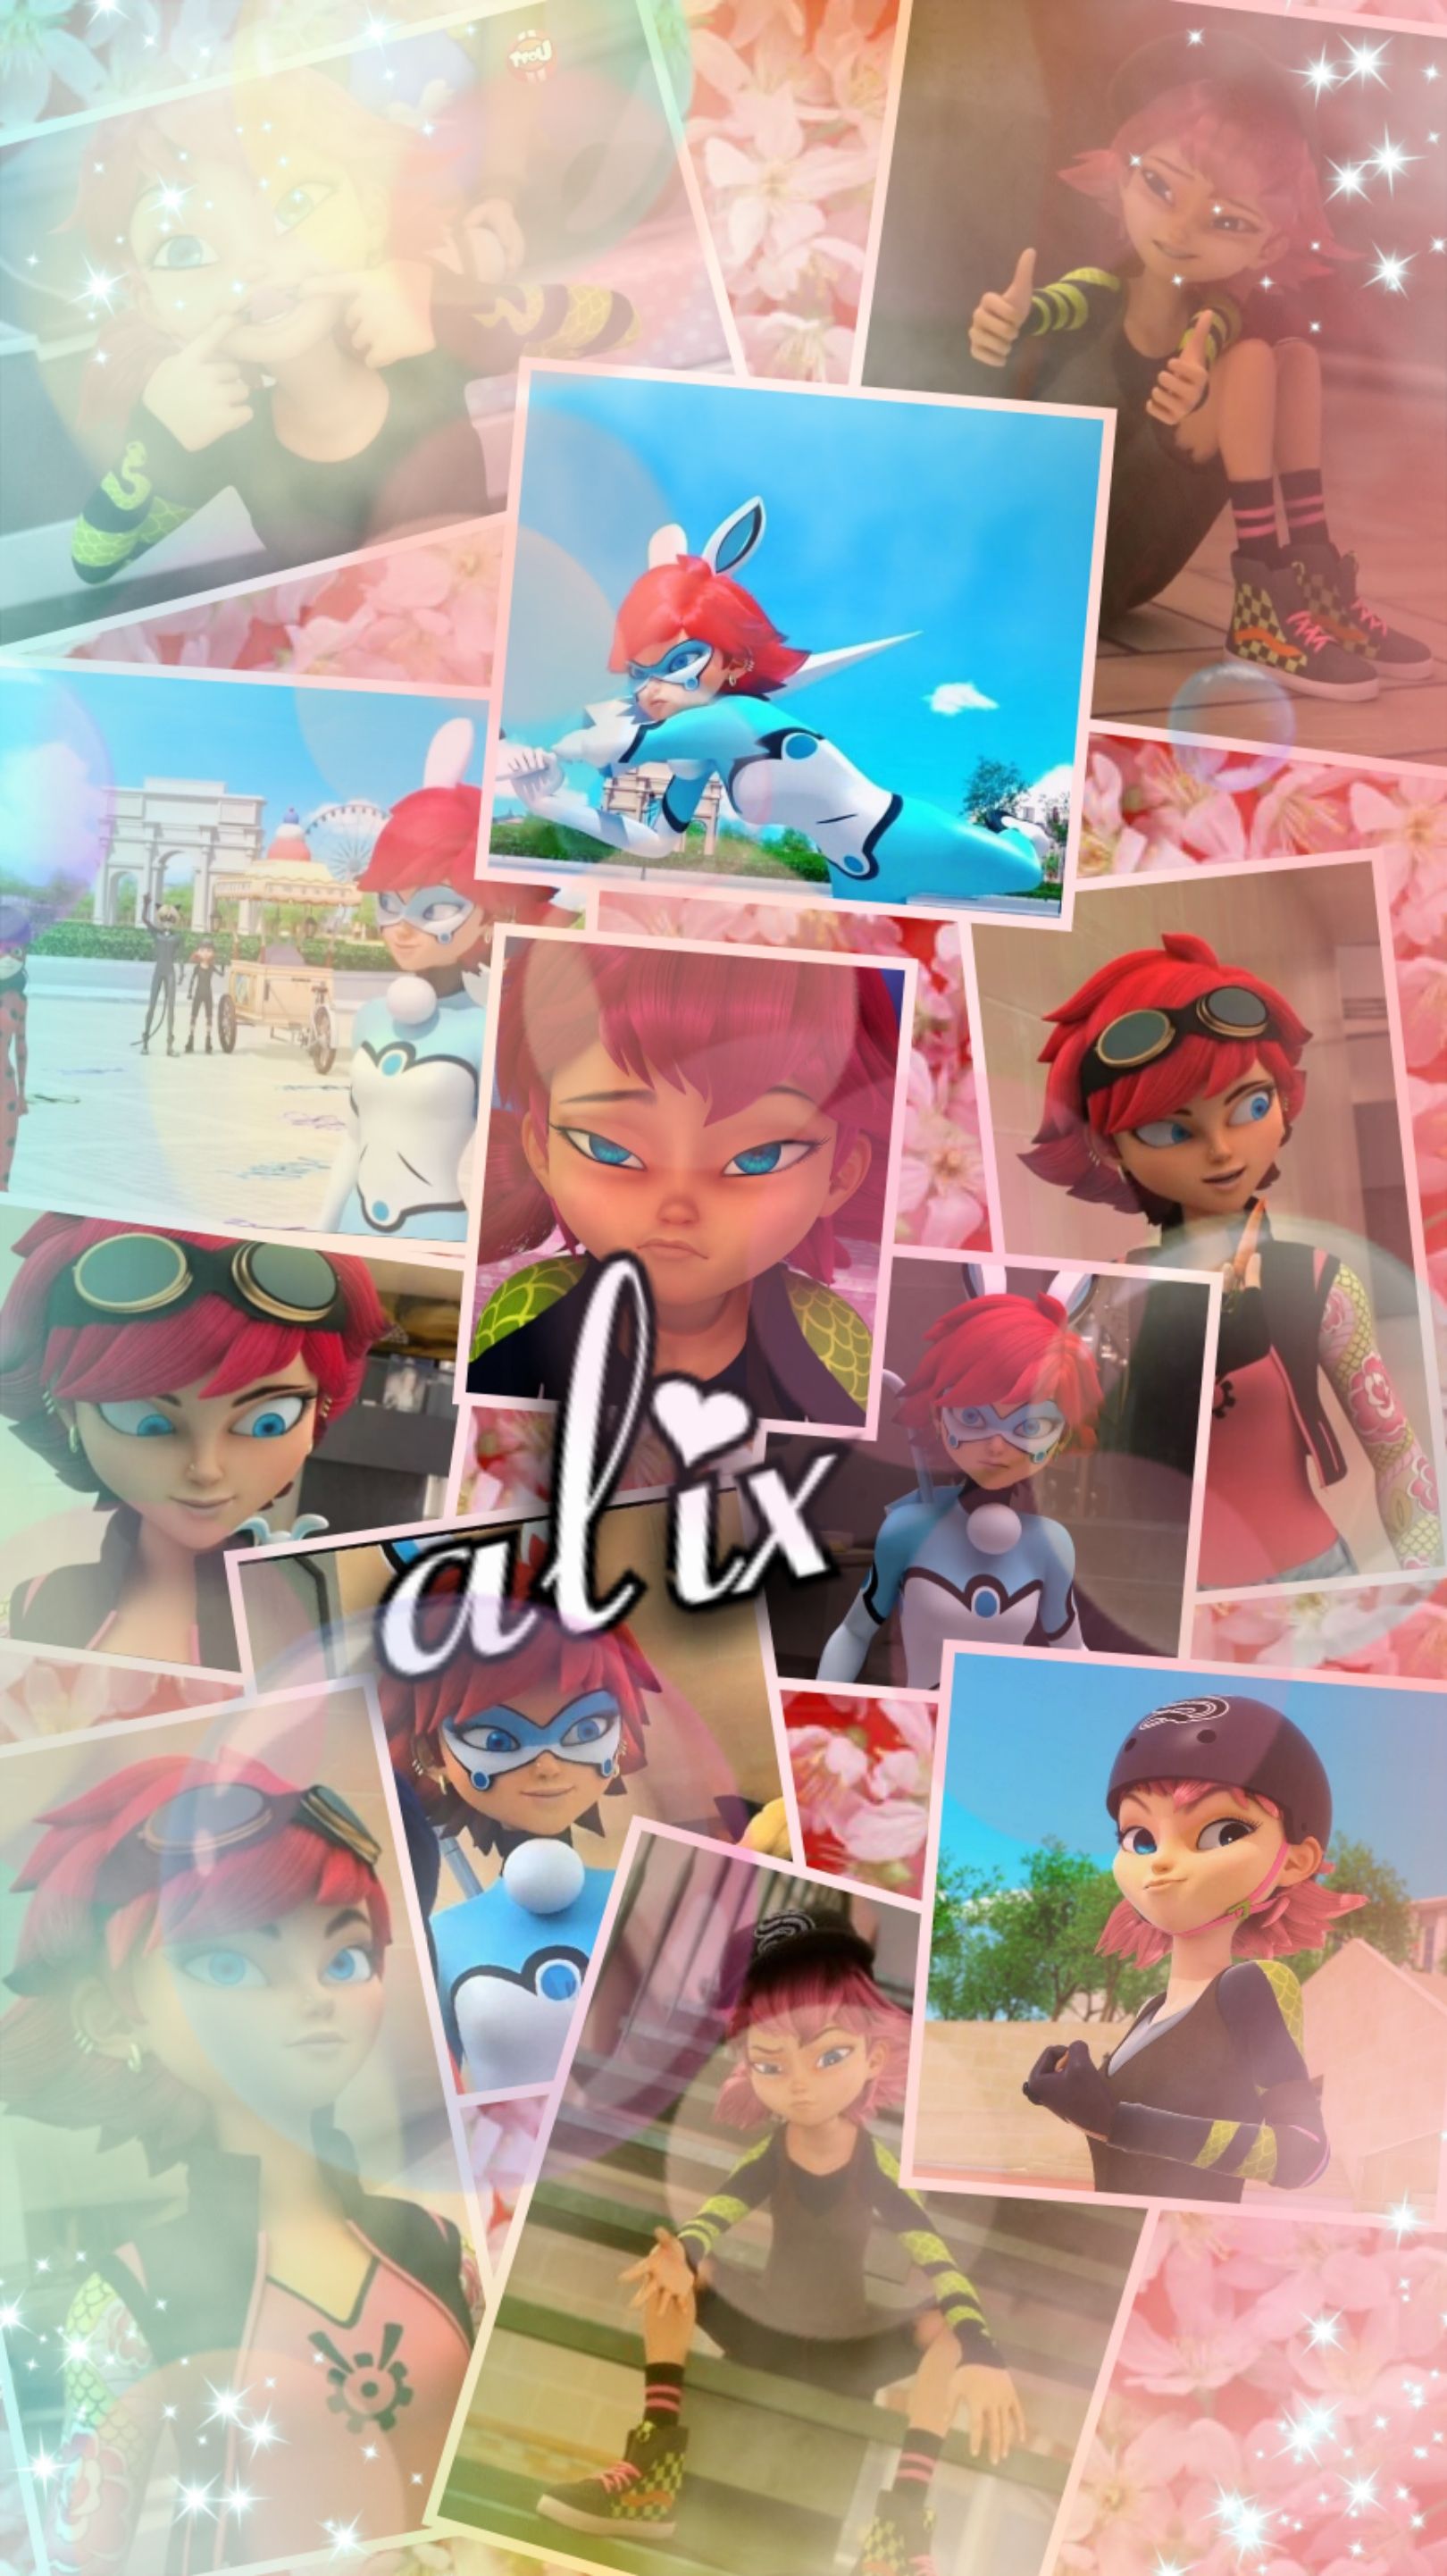 I am so sorry that I forgot to post this it got lost in all of my crap. Anyways here is the Alix wallpaper. I need suggestions guys and gals